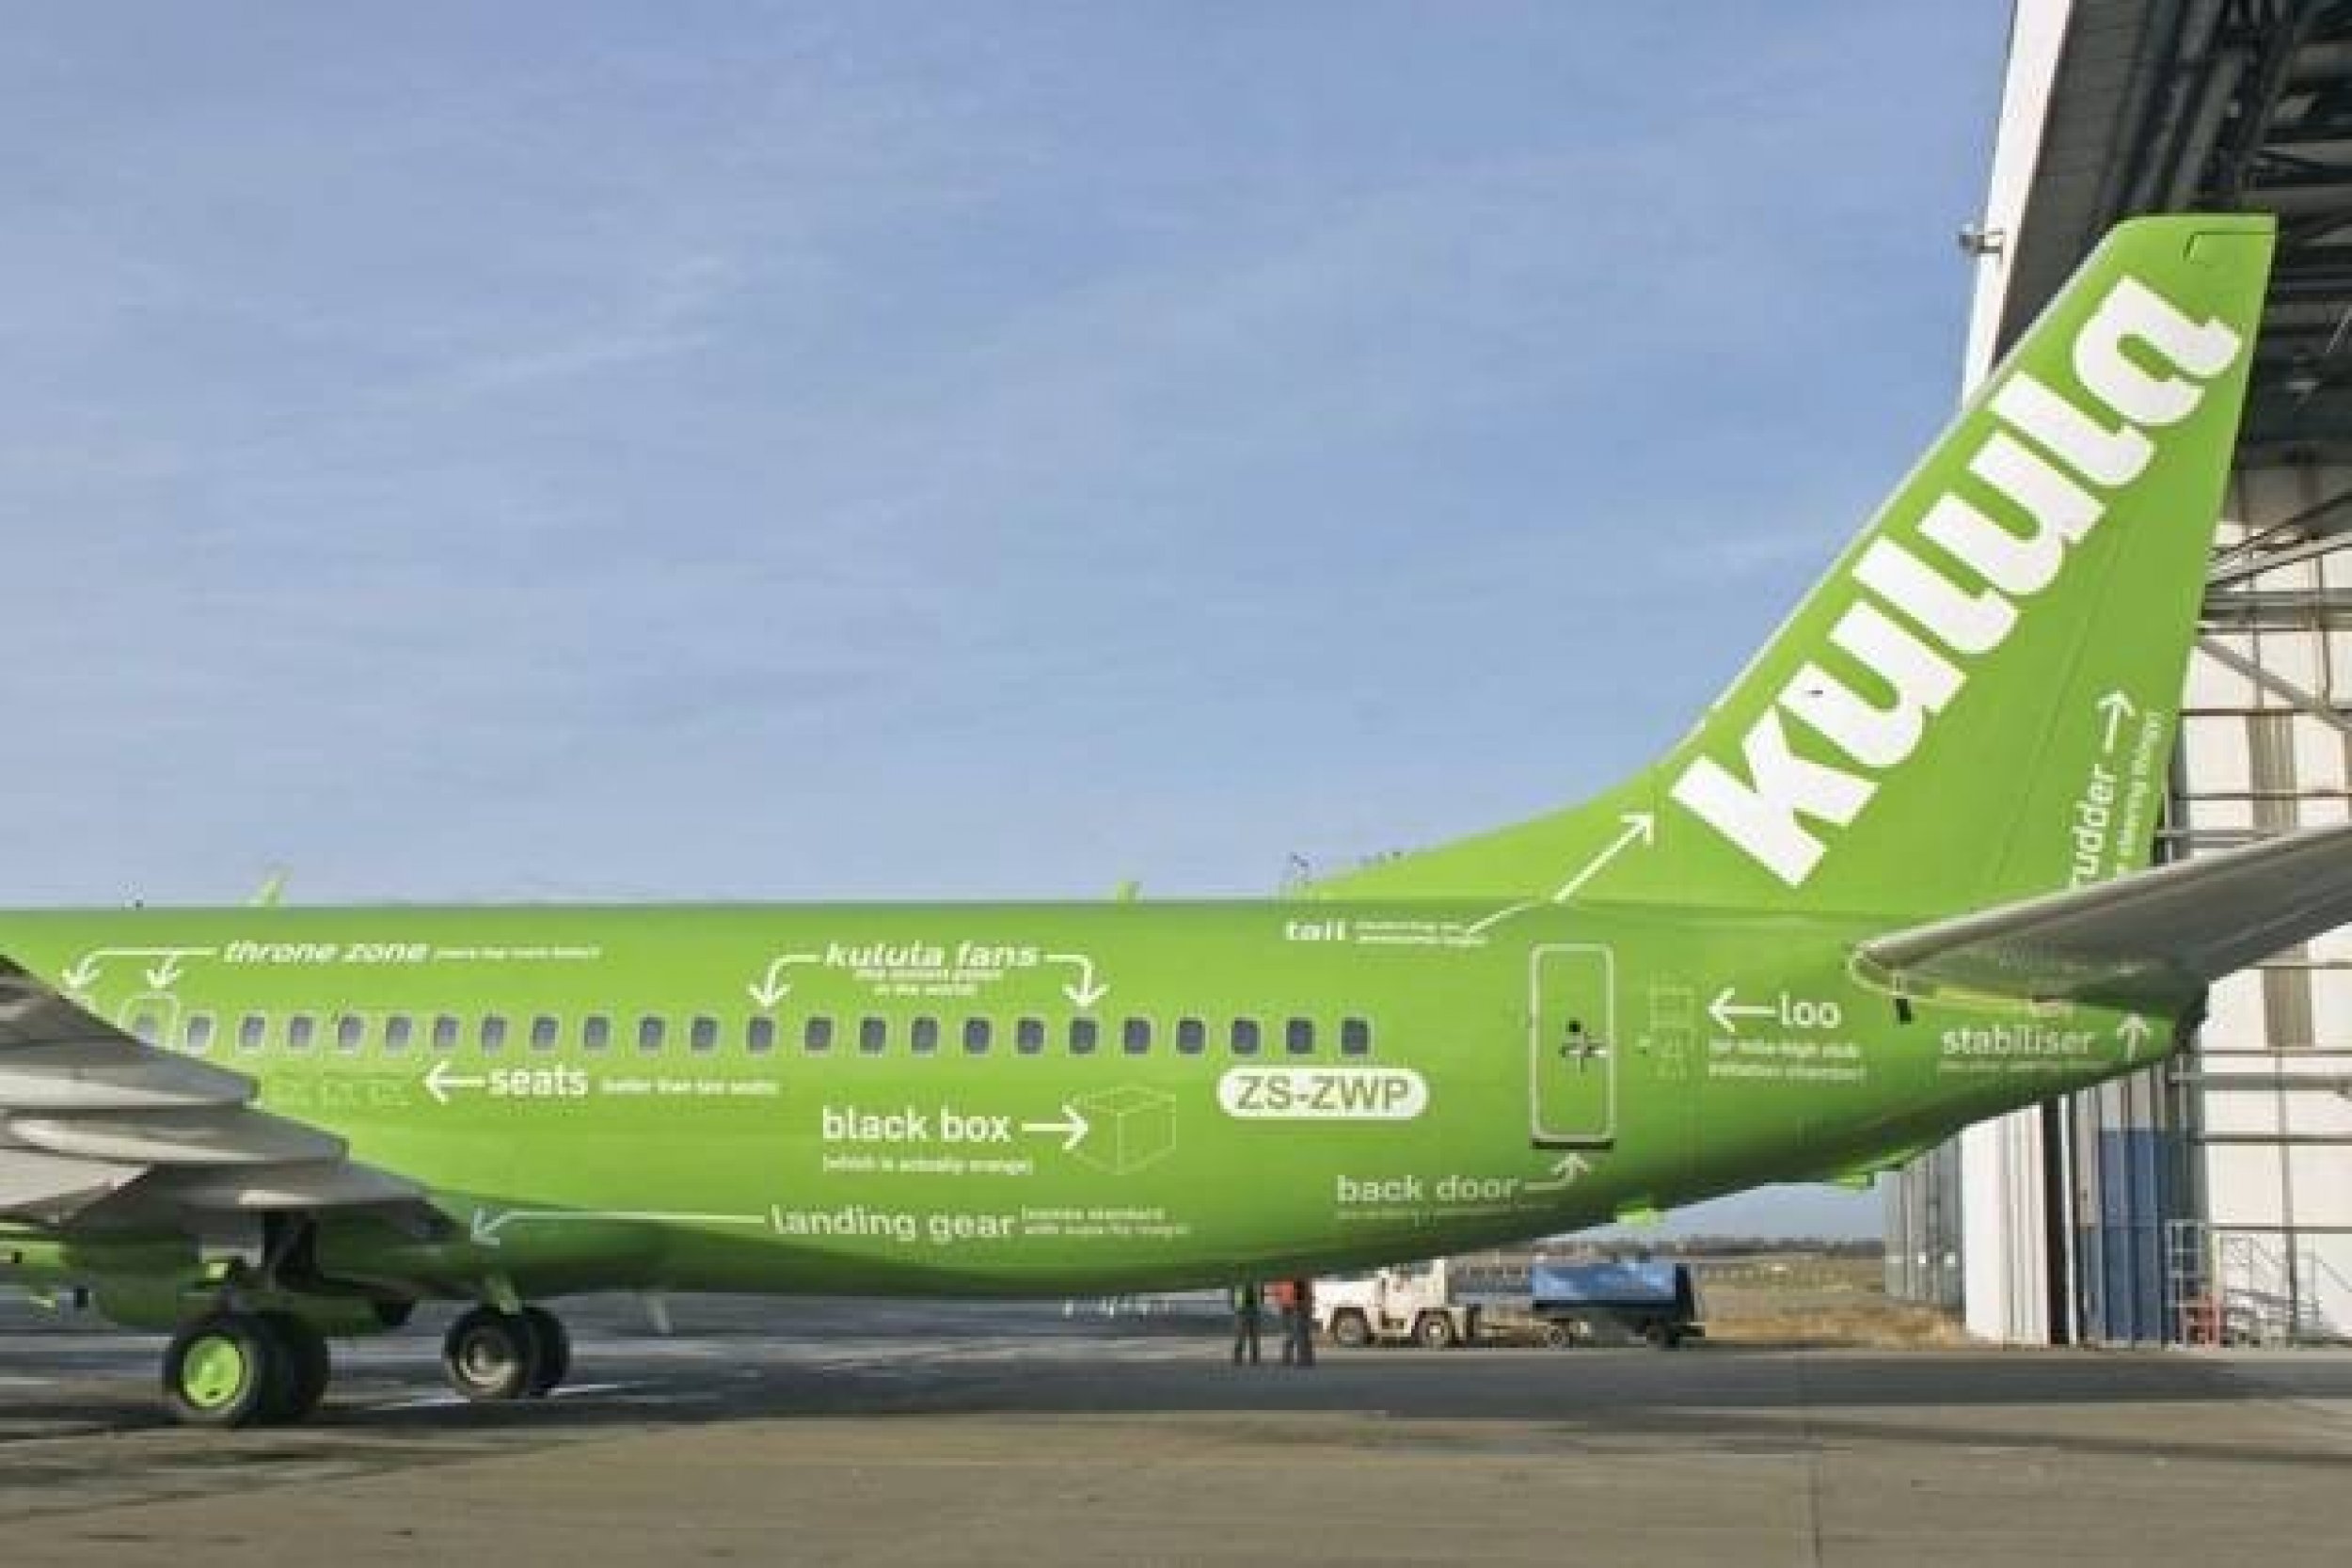 In case you didnt know the different parts of an airplane, Kulula Airlines has marked its own jet to tell you what everything is. Another view from the left side of the plane, which shows the loo, the rear stabilizer, the tail, and the rudder.